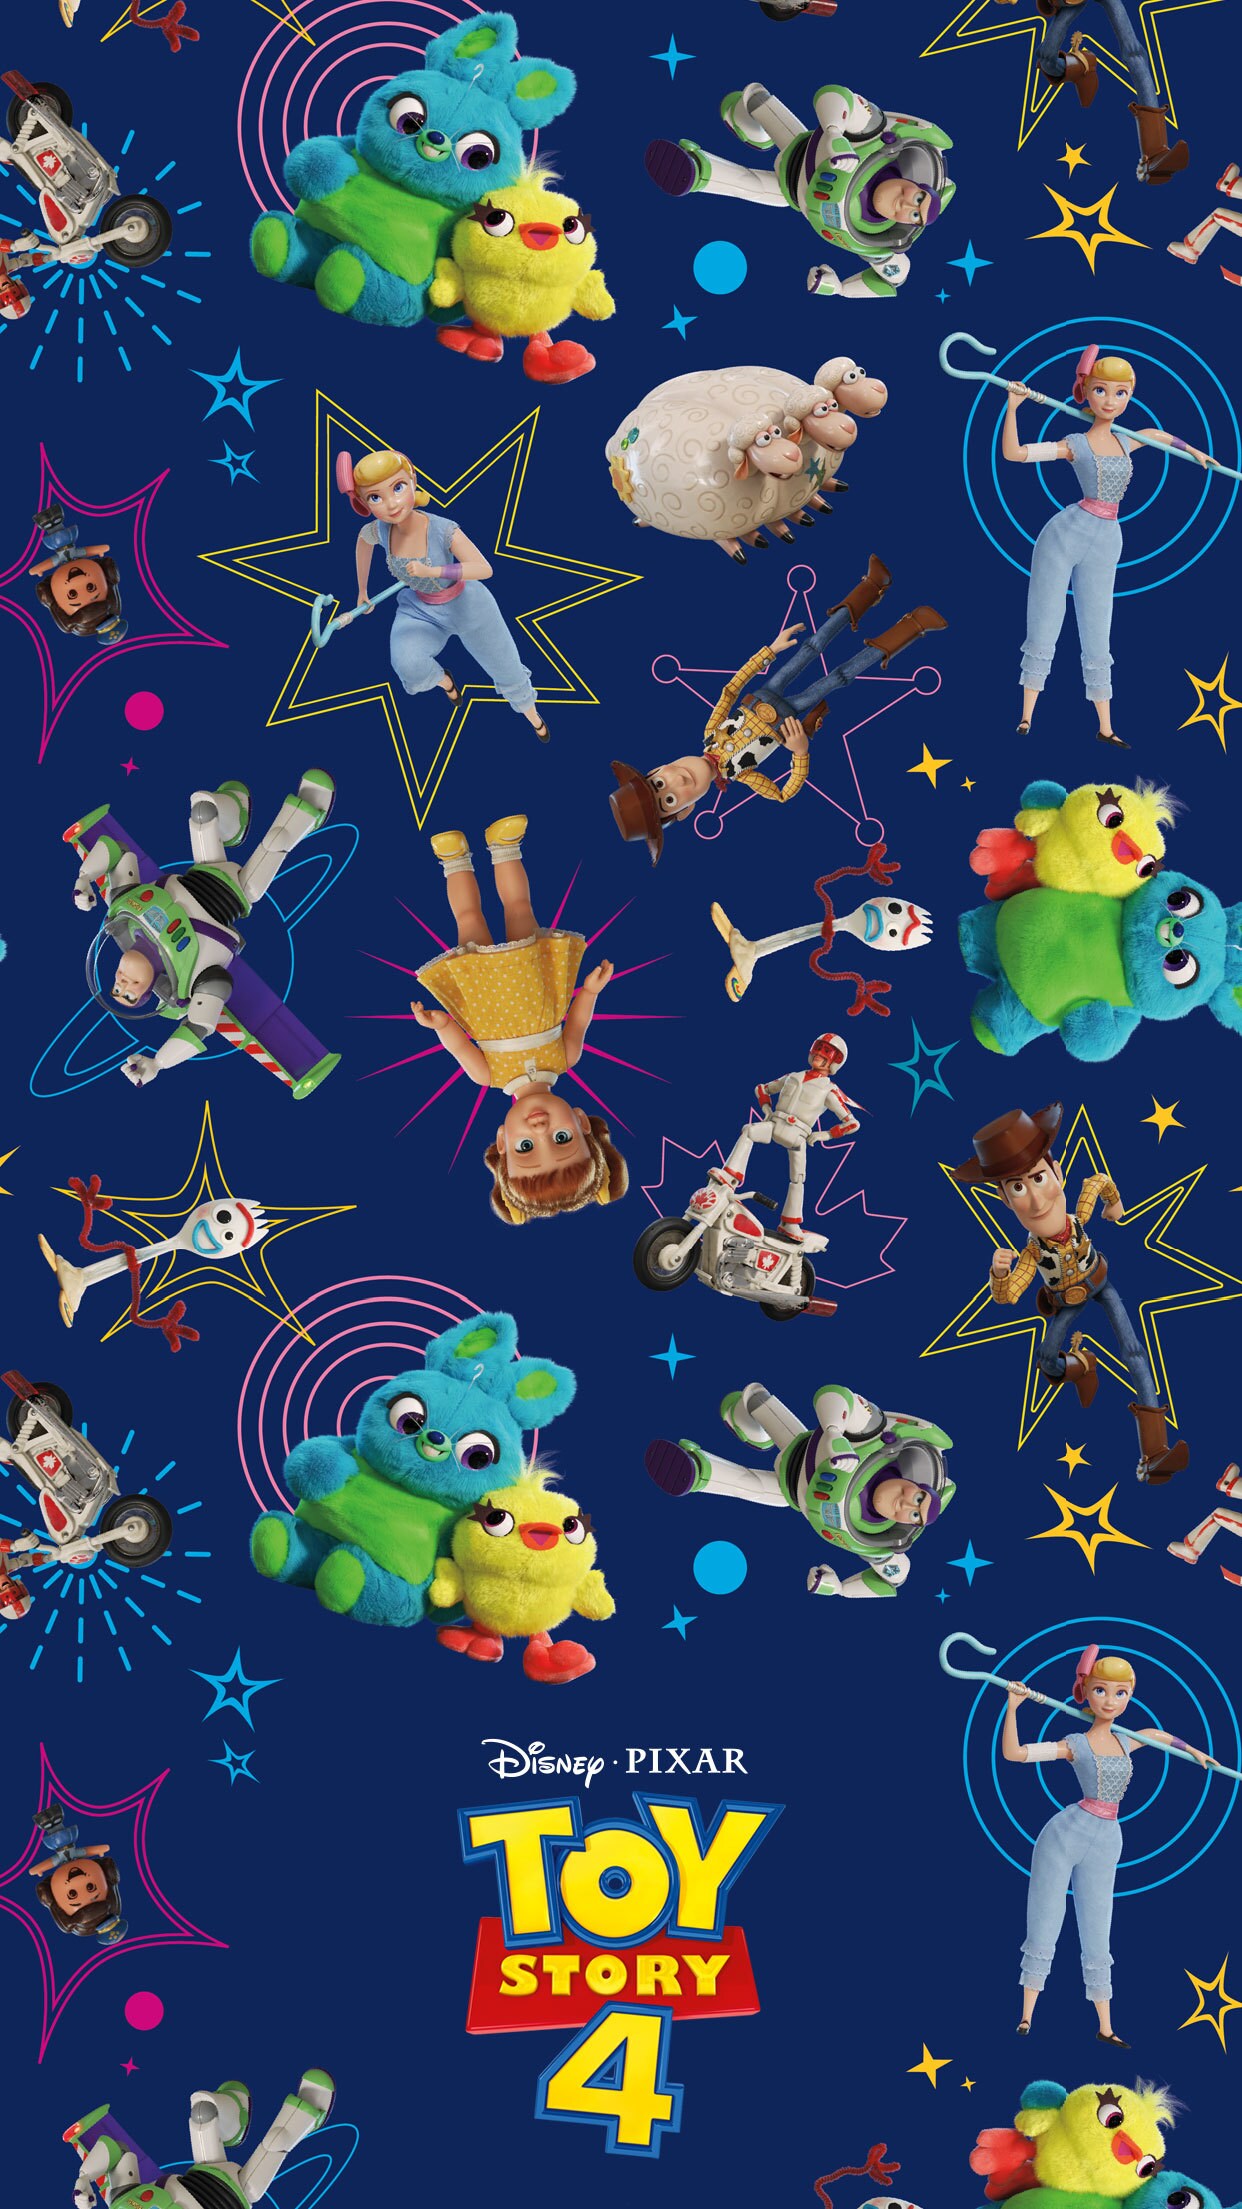 Go To Infinity And Beyond With These Disney And Pixar Toy Story 4 Mobile Wallpapers Disney Singapore